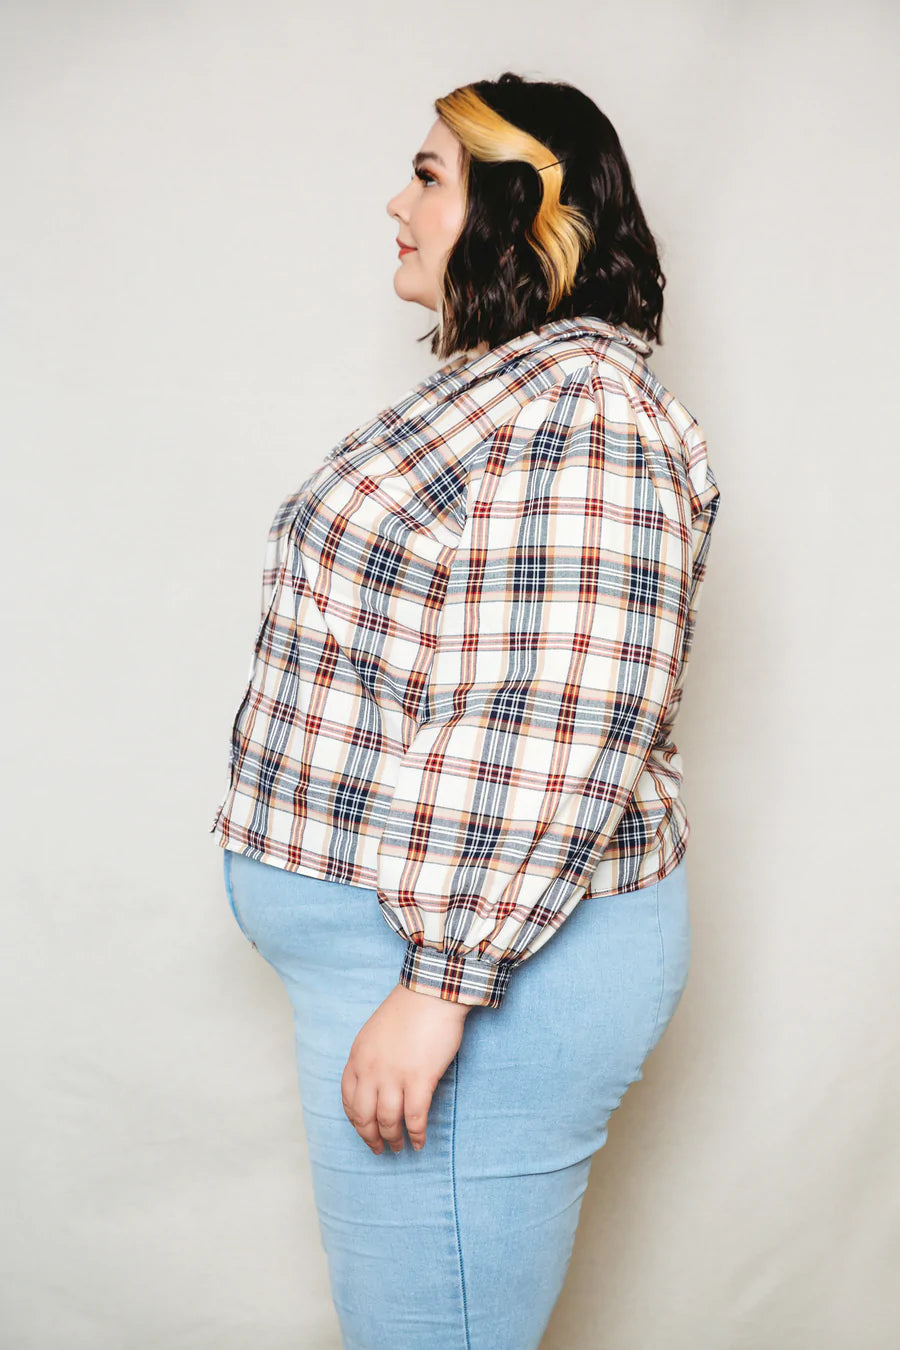 FRIDAY Pattern Co - the Patina Blouse Sewing Pattern